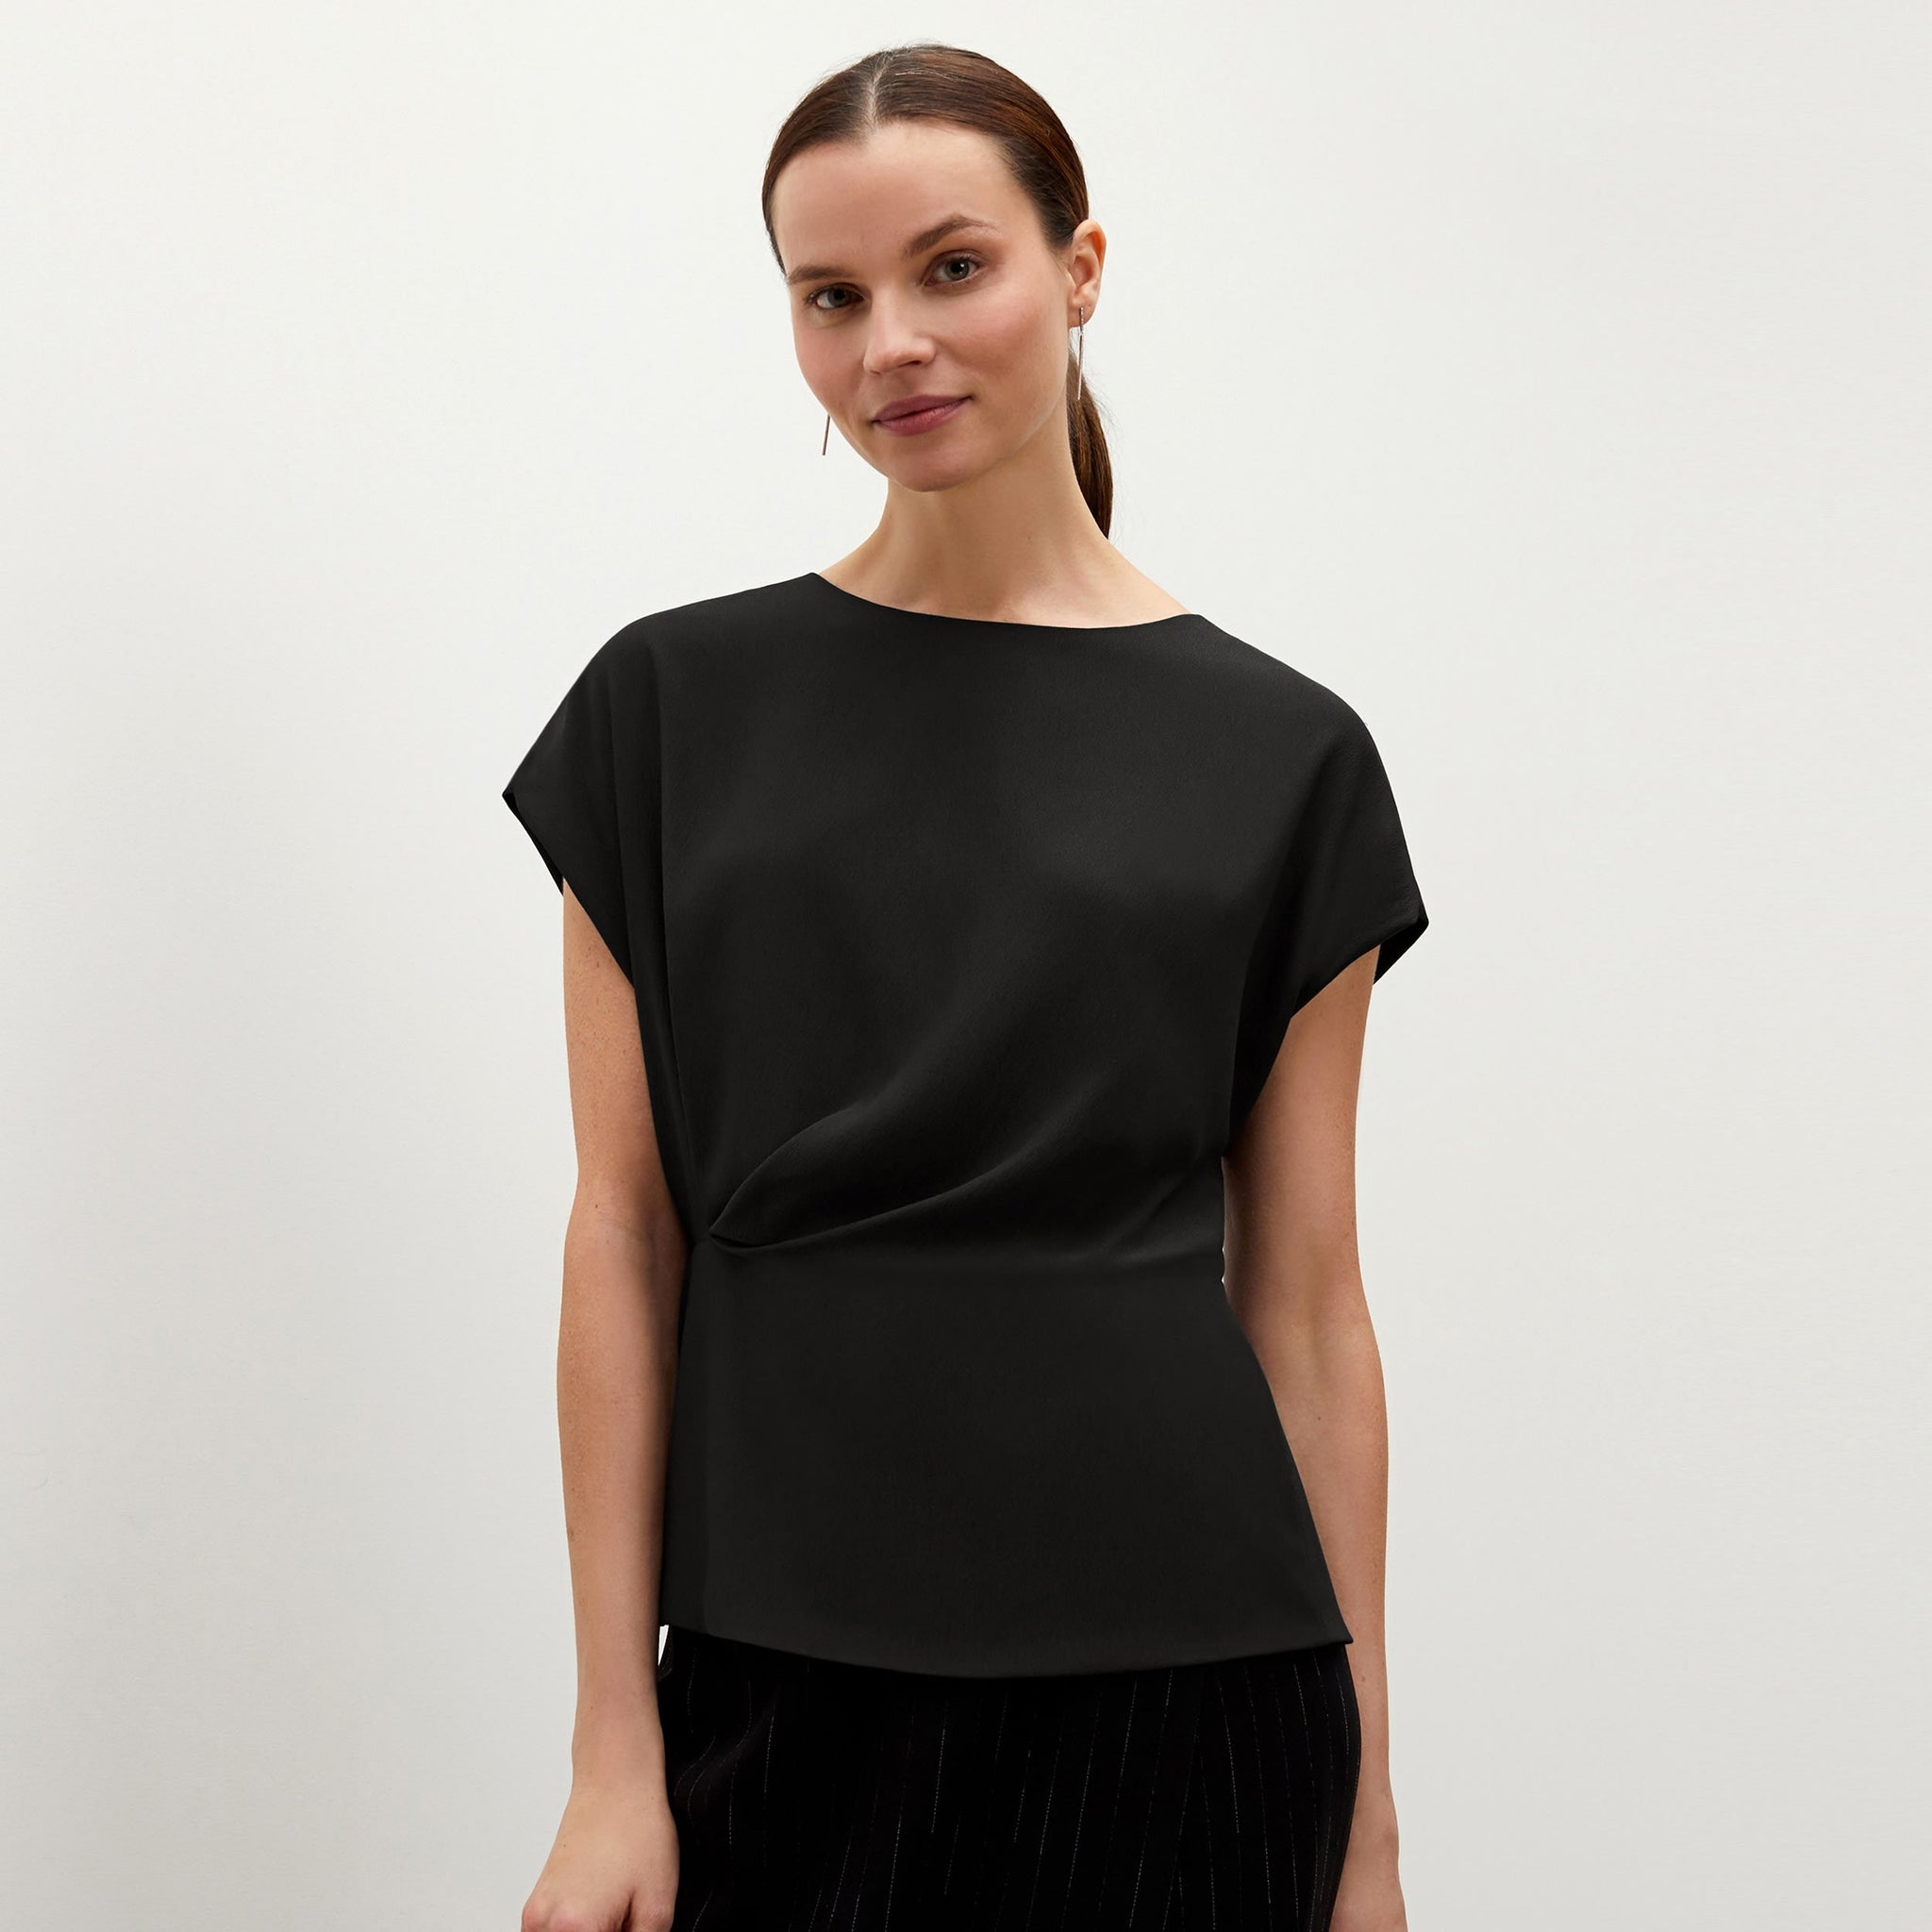 Front image of a woman standing wearing the Nejvi top in black